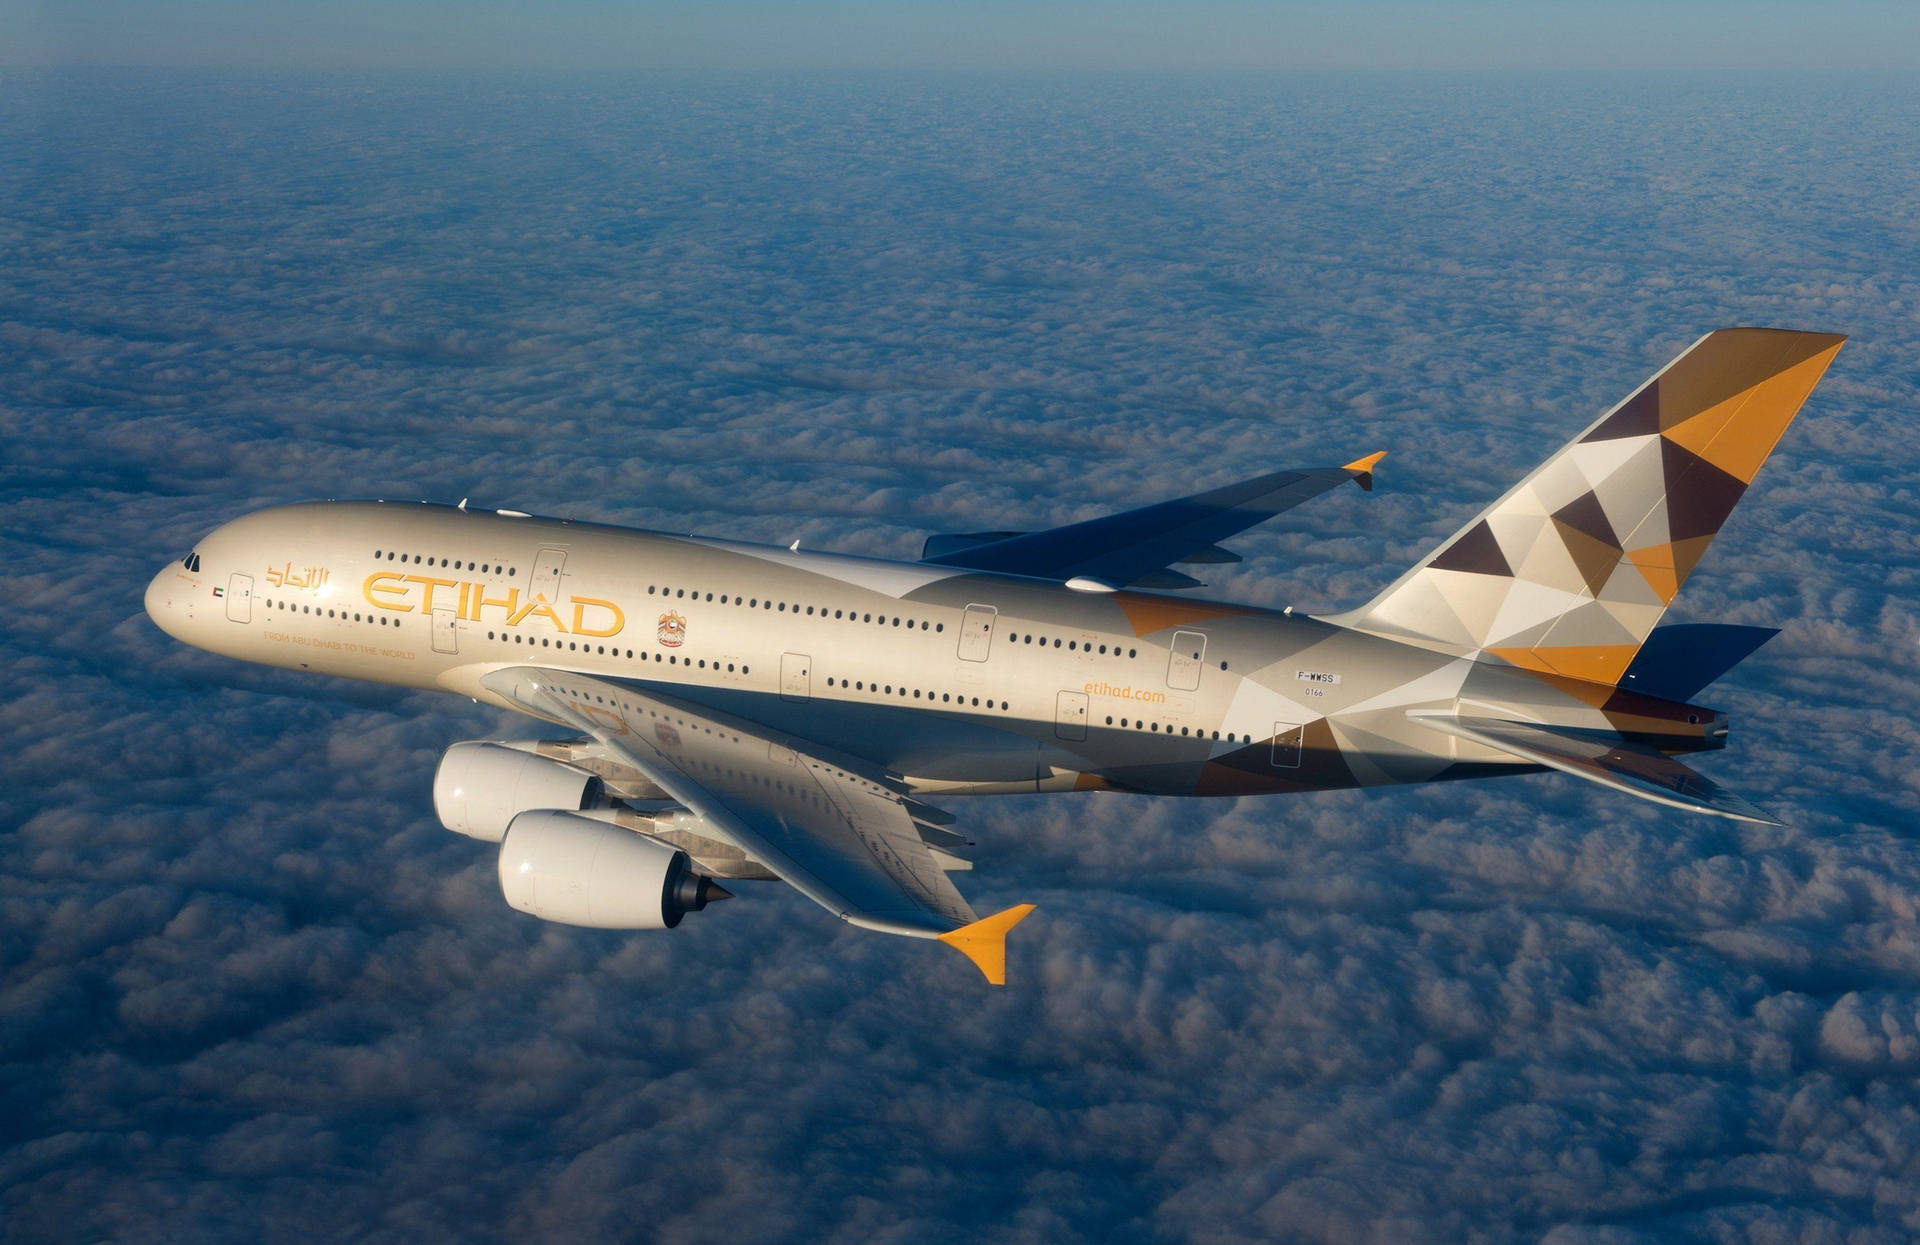 Flying Etihad Airplane Over The Clouds Wallpaper